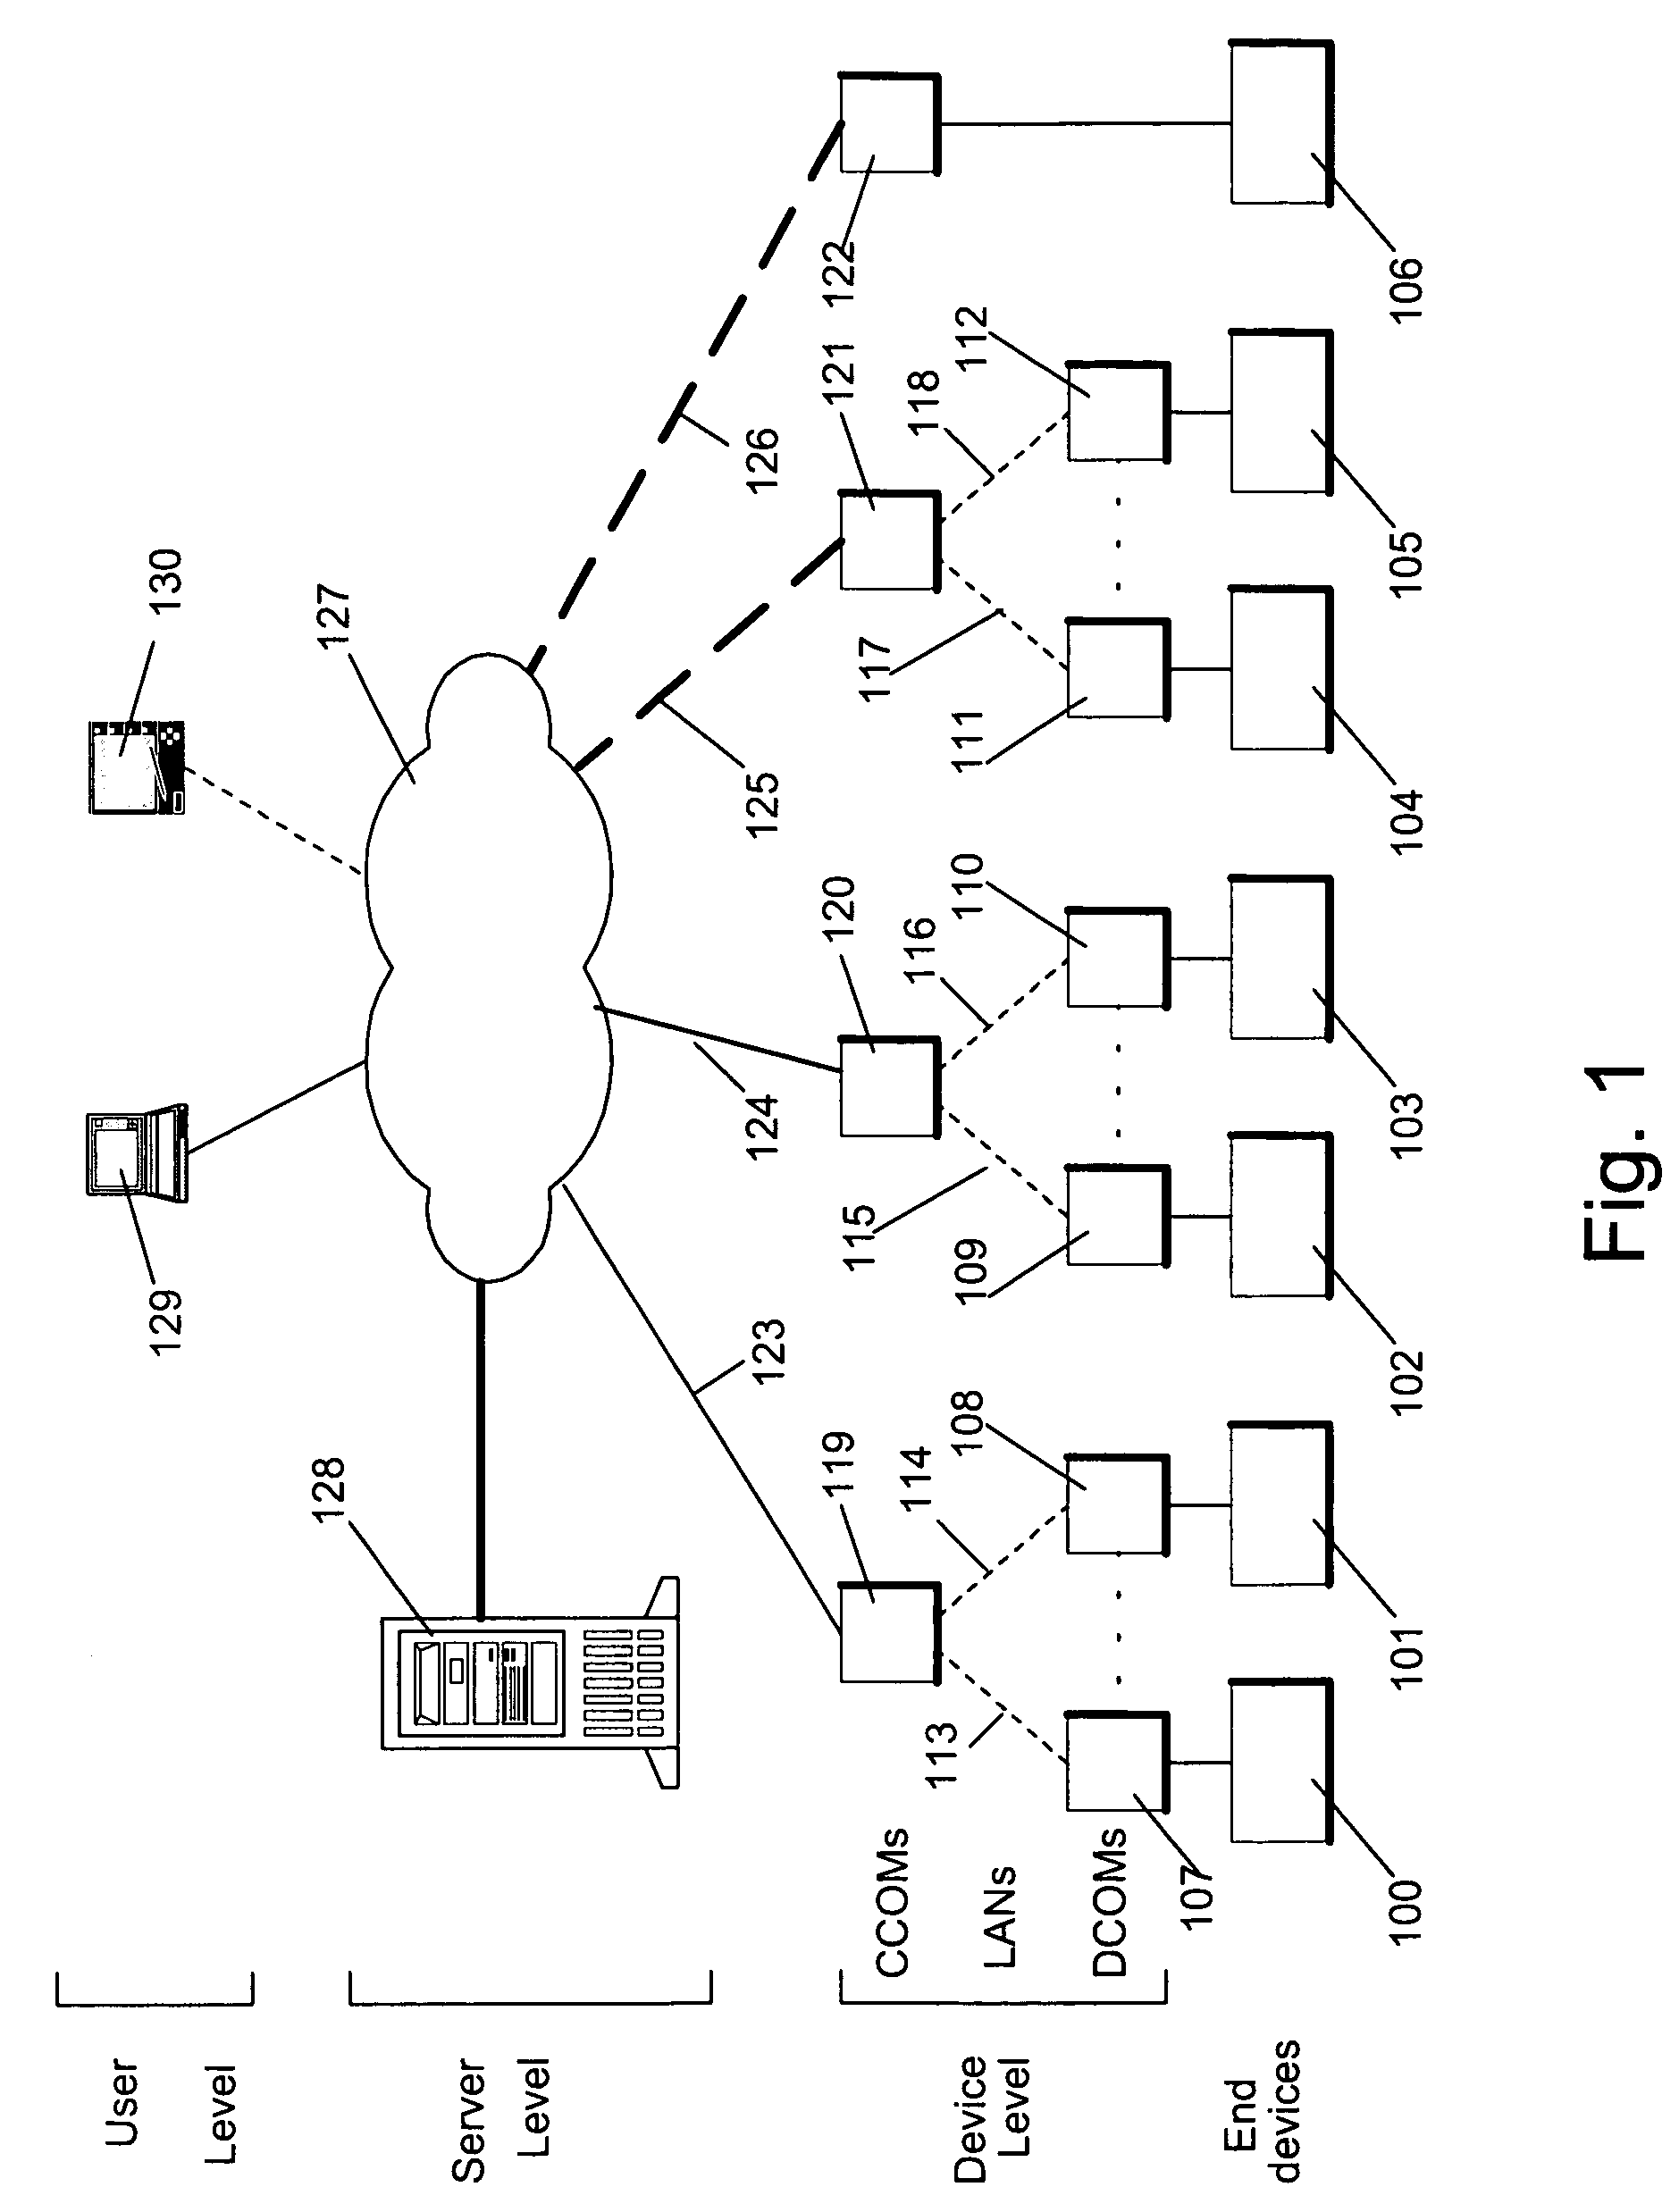 Method and apparatus for inexpensively monitoring and controlling remotely distributed appliances